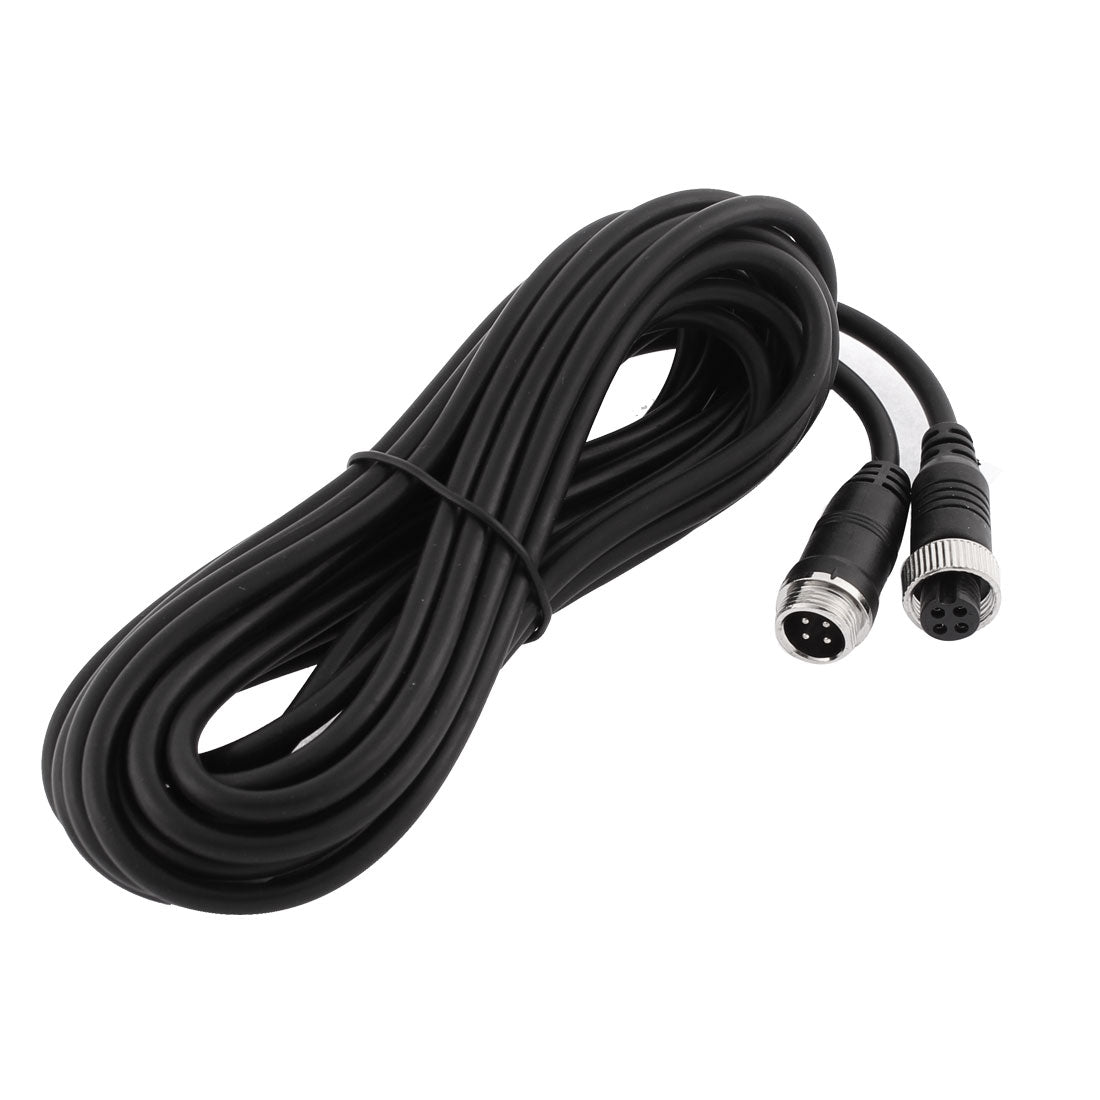 uxcell Uxcell Car Bus Monitor Camera Male to Female 4 Pin Video Power Extension Cable 5M 16ft